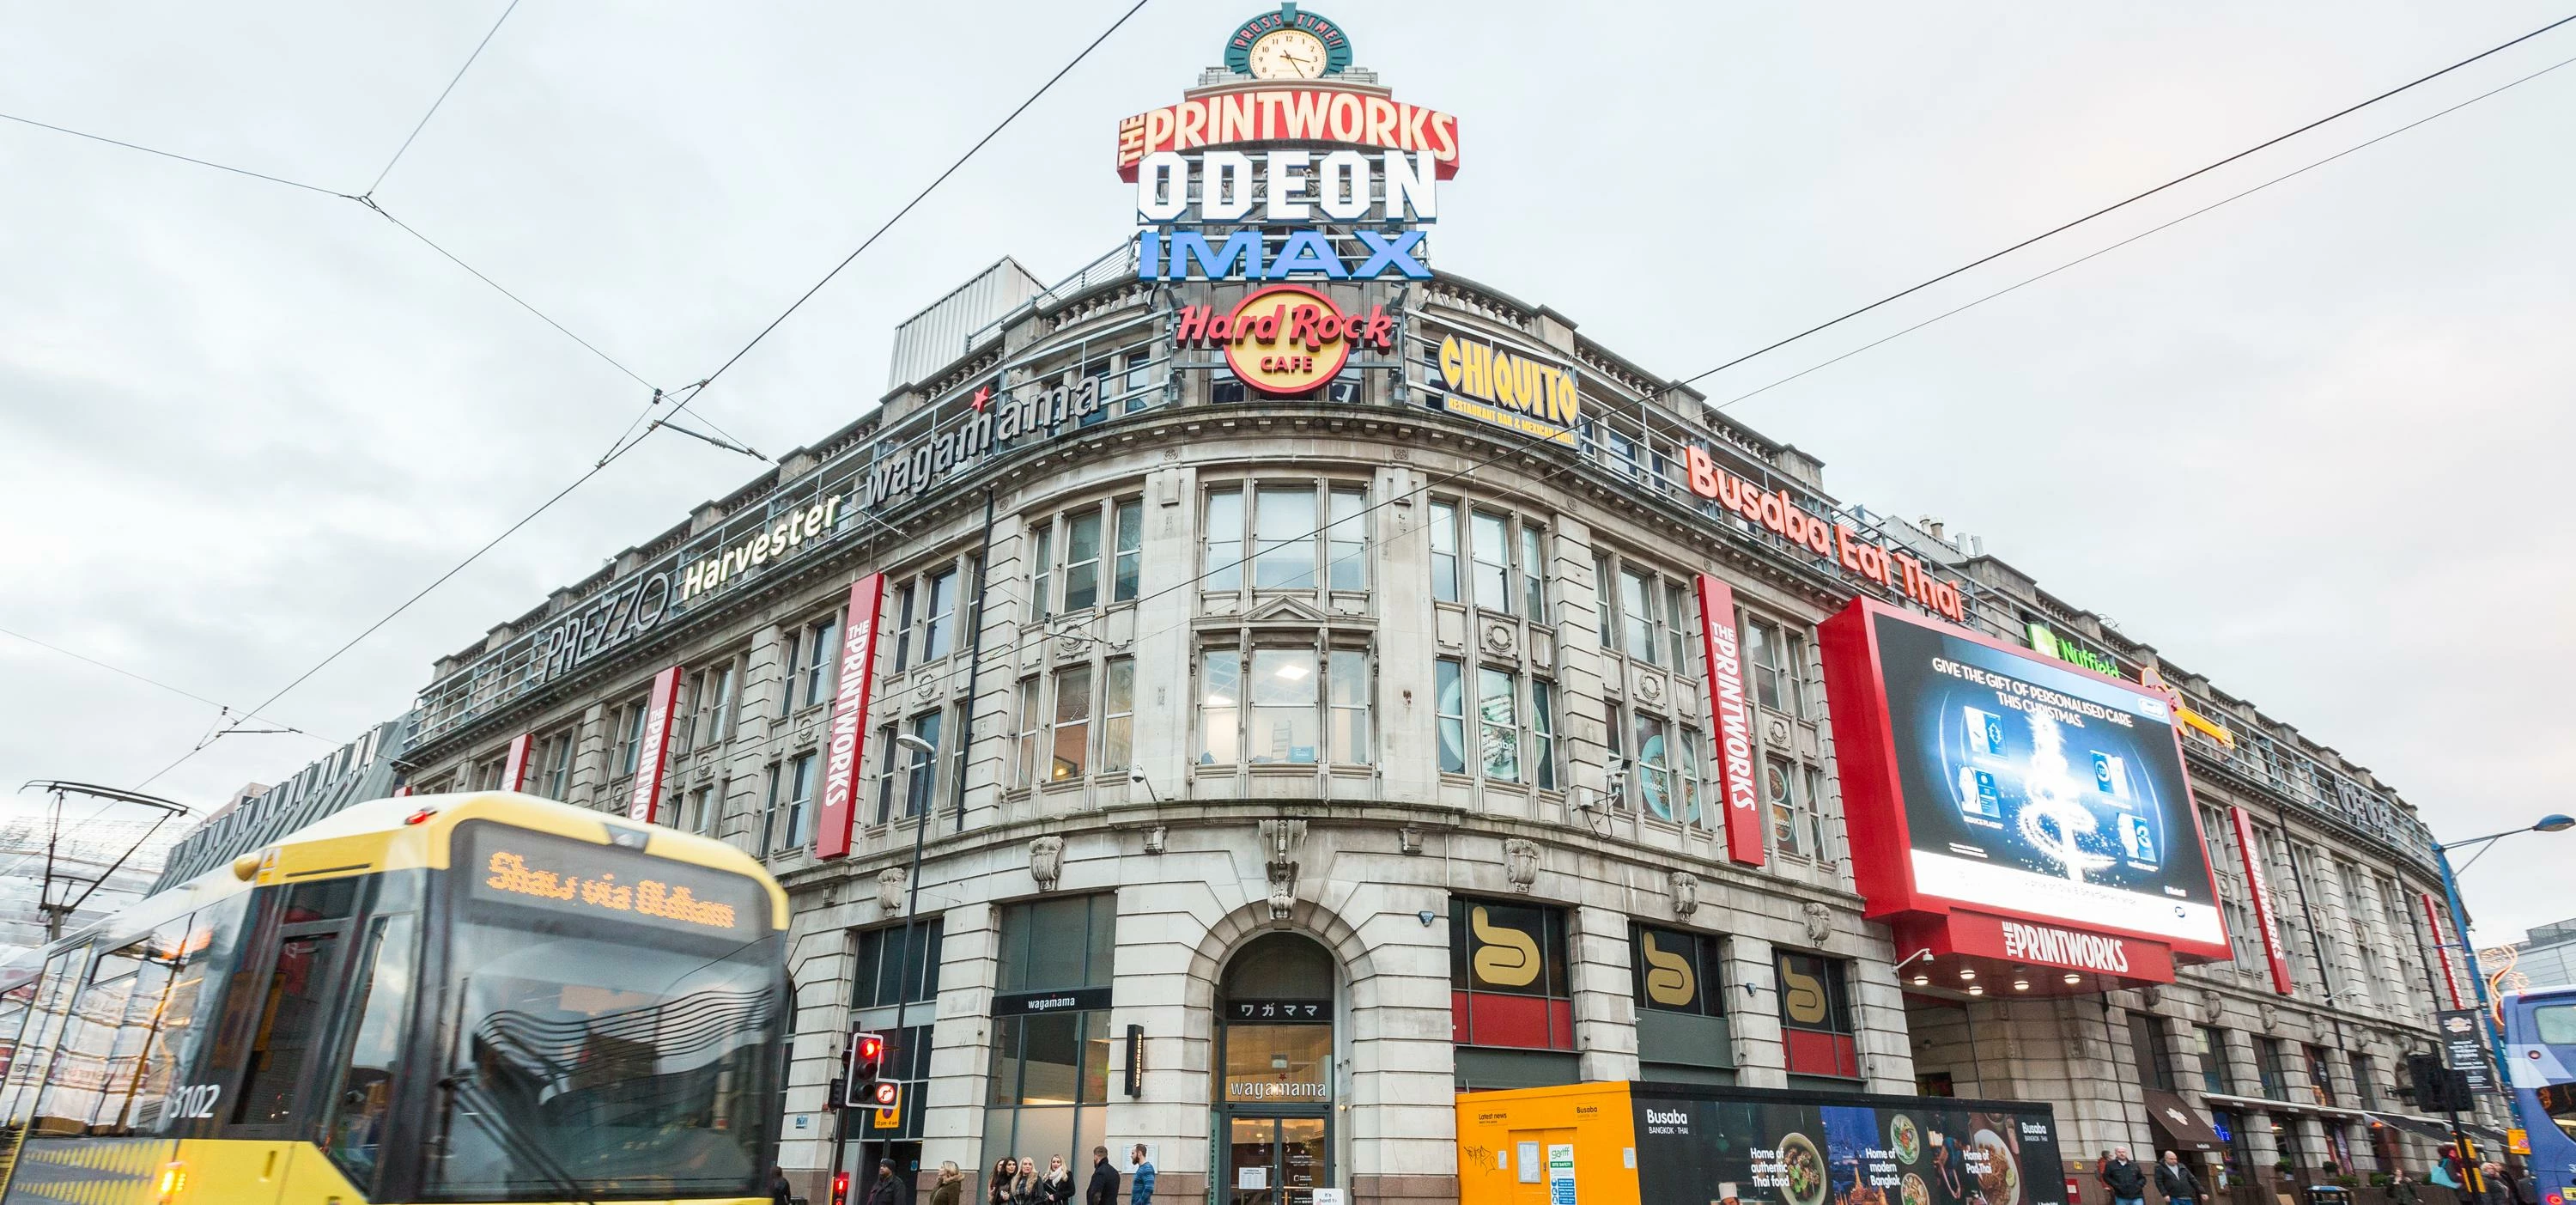 Treat your mum at The Printworks this Mother's Day